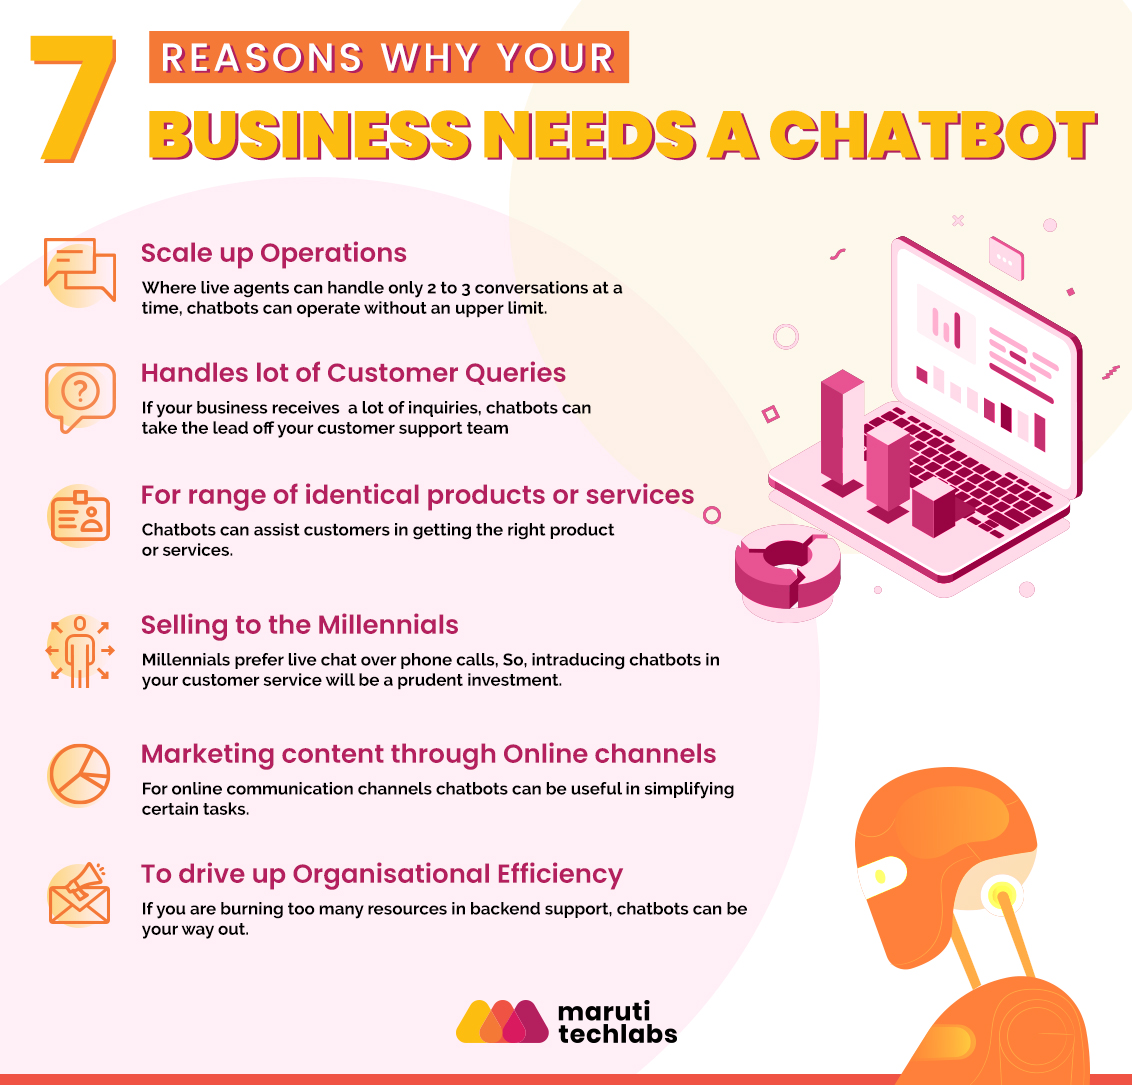 7 reasons why your business needs a chatbot